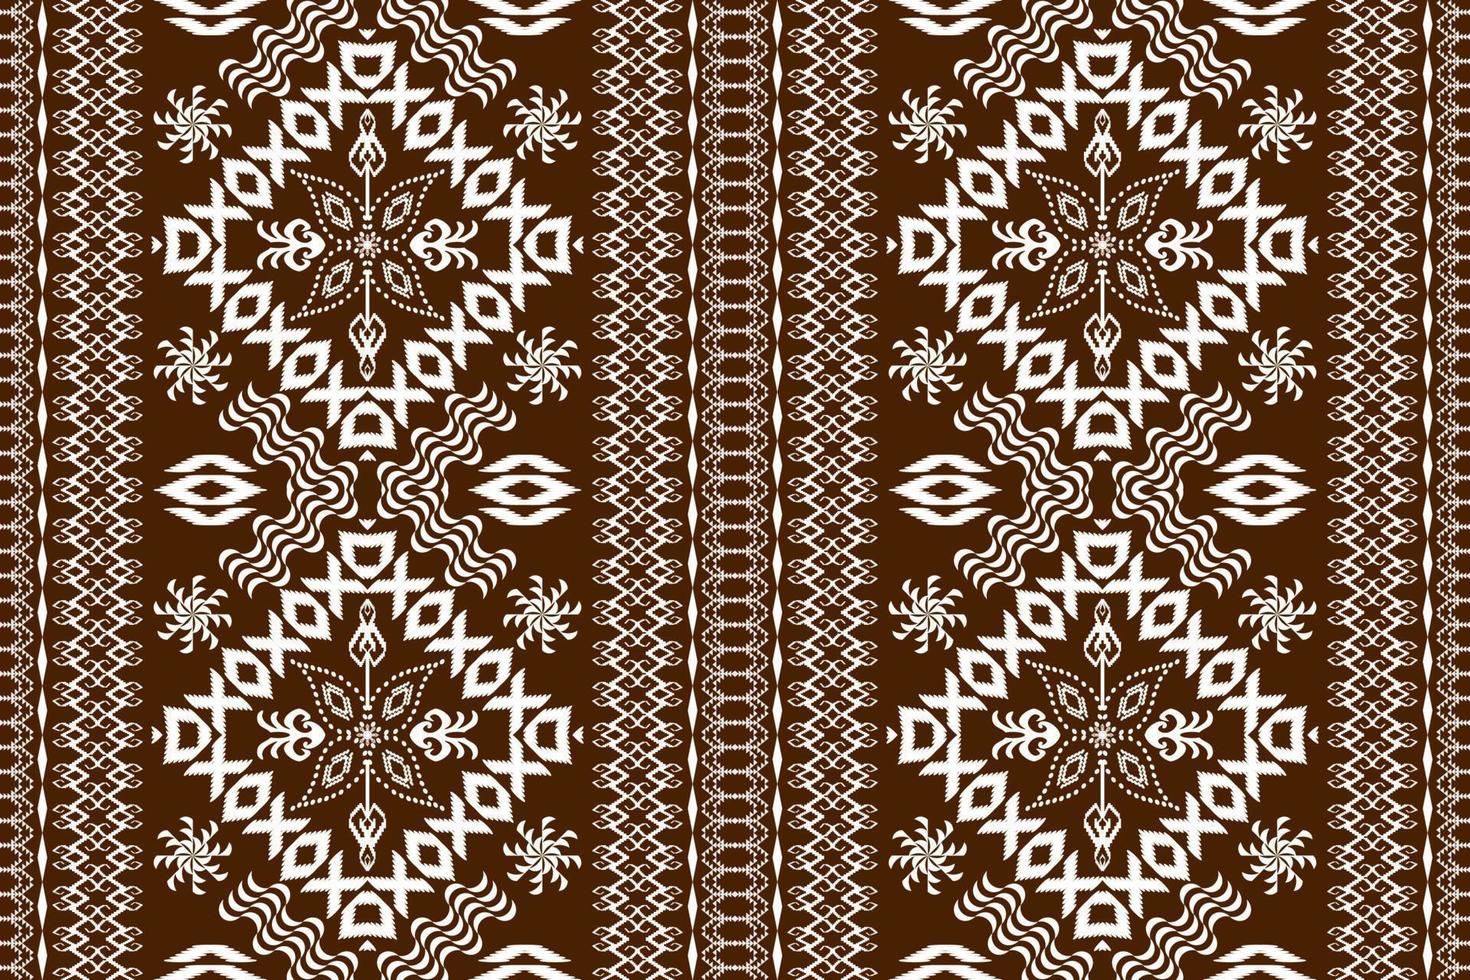 Beautiful embroidery.geometric ethnic oriental pattern traditional.Aztec style,abstract,vector,illustration.design for texture,fabric,clothing,wrapping,fashion,carpet,print. vector